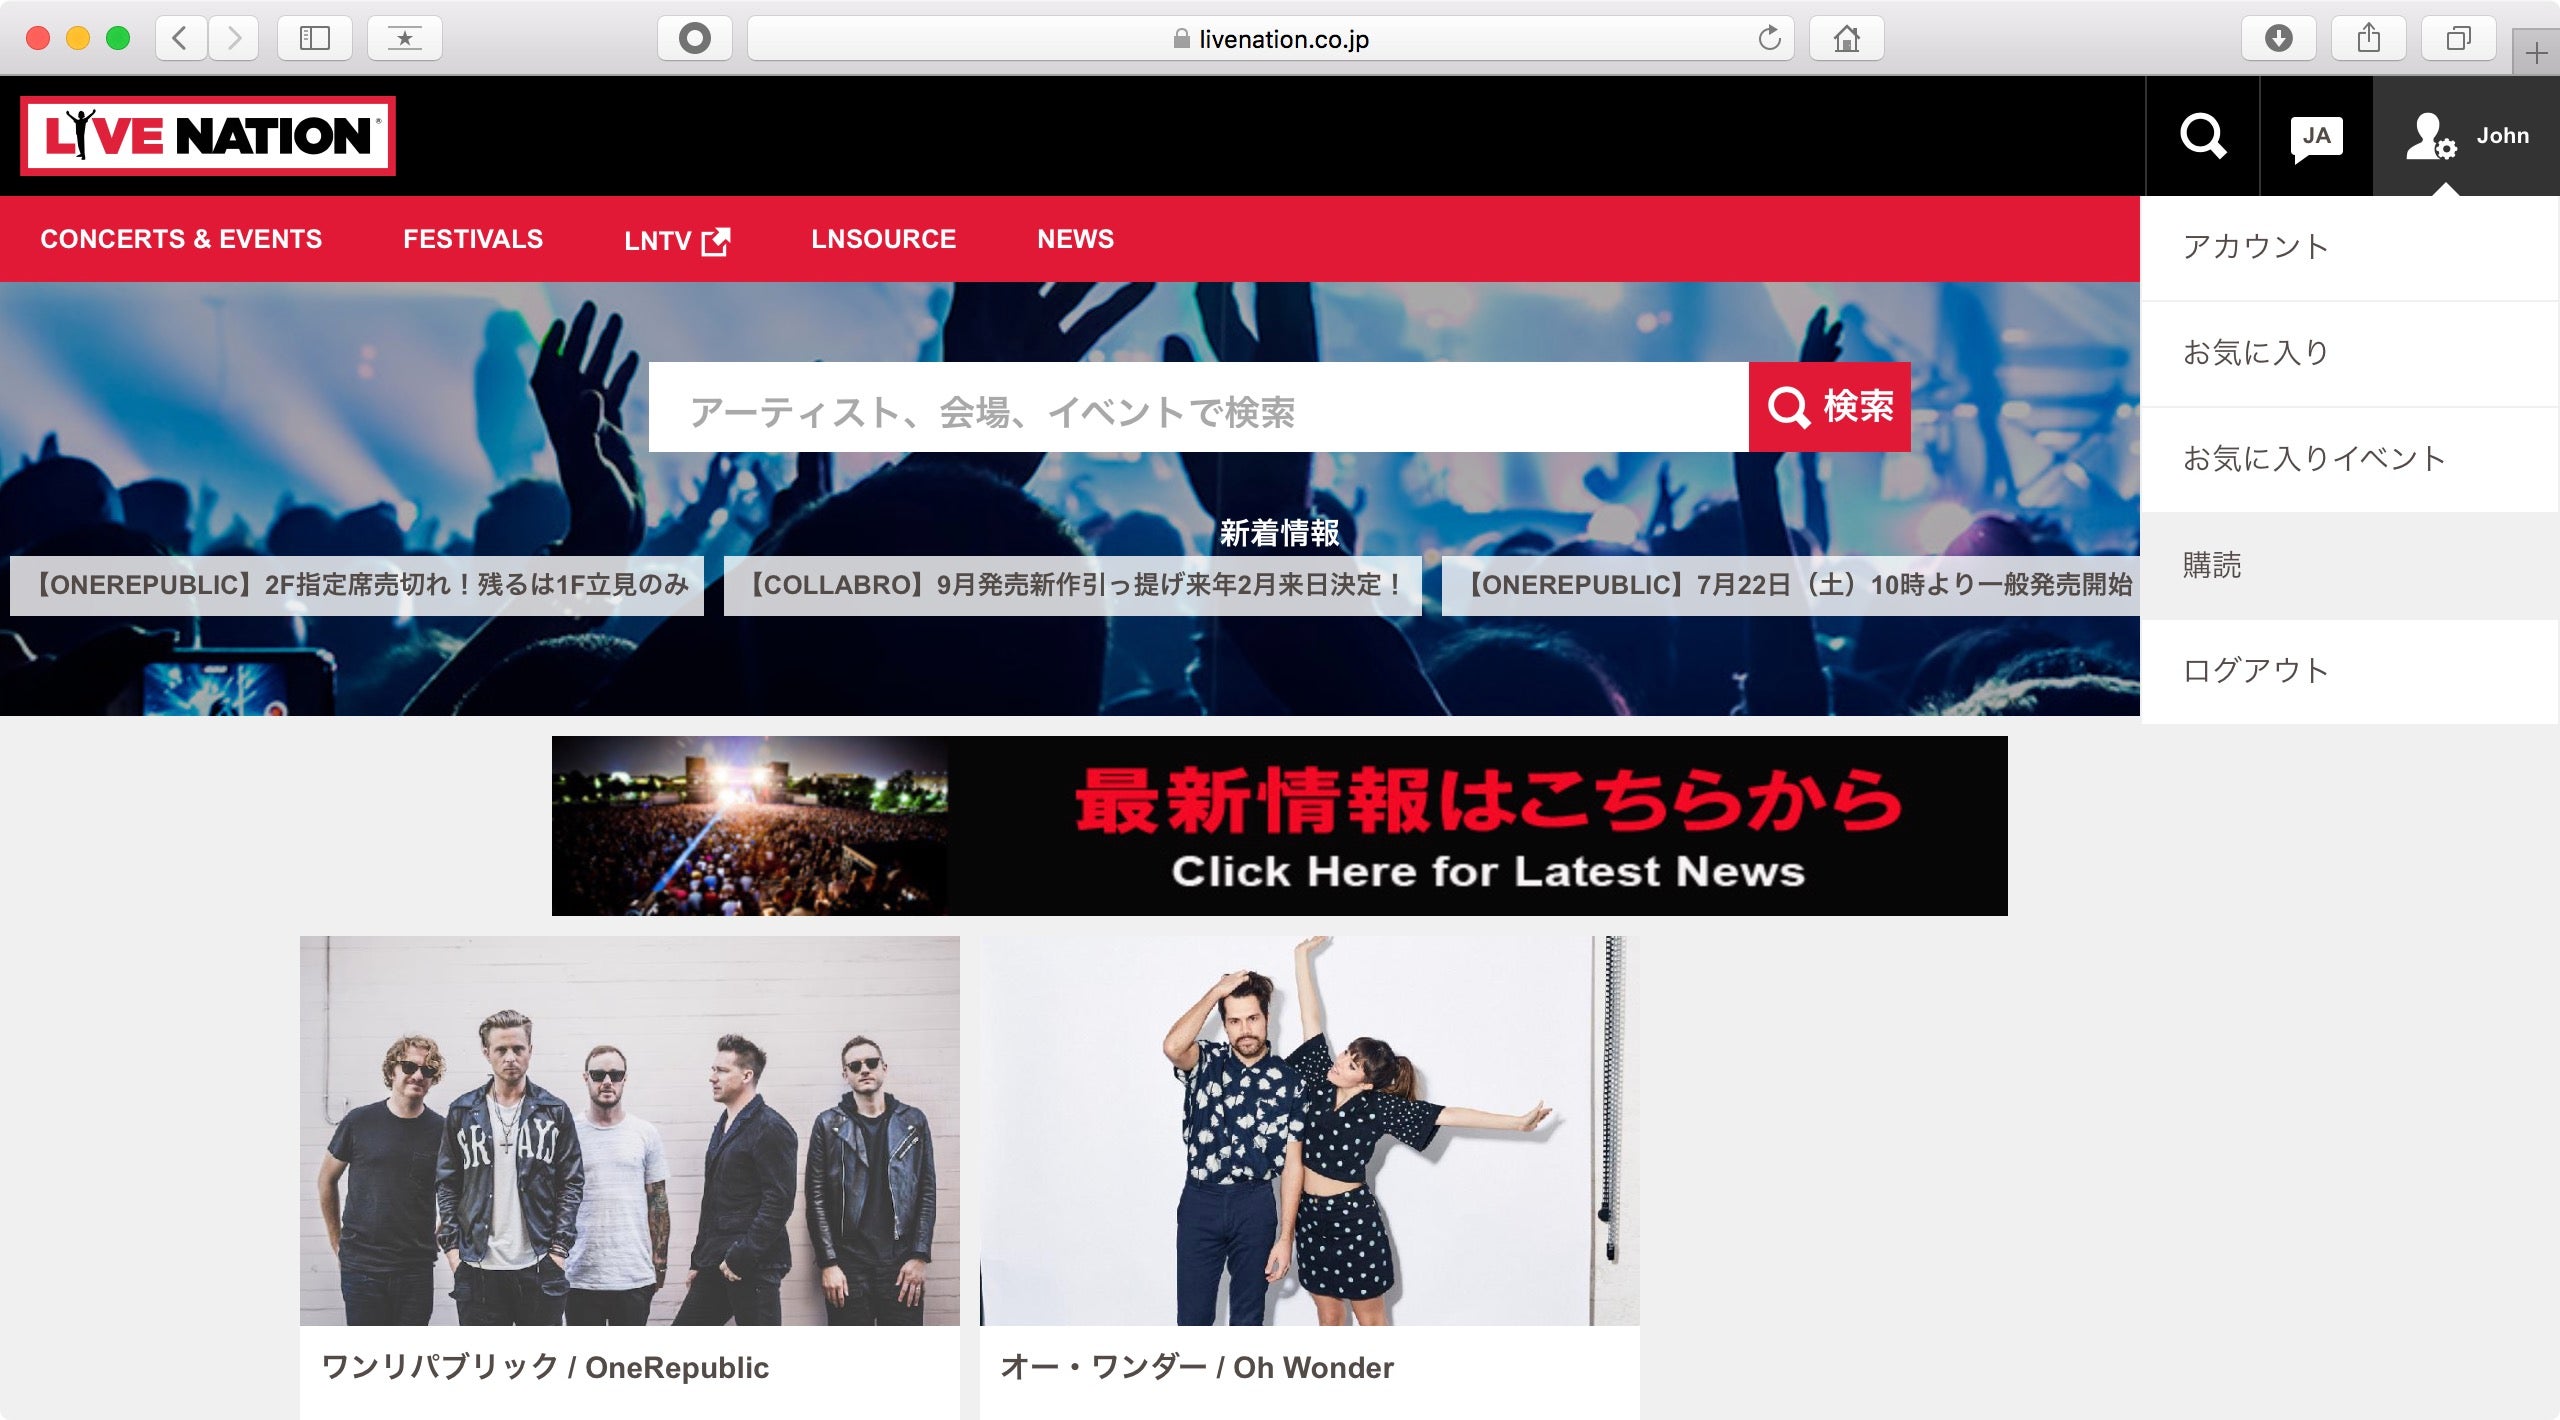 Log in Live Nation with your existing account, go to Subscriptions